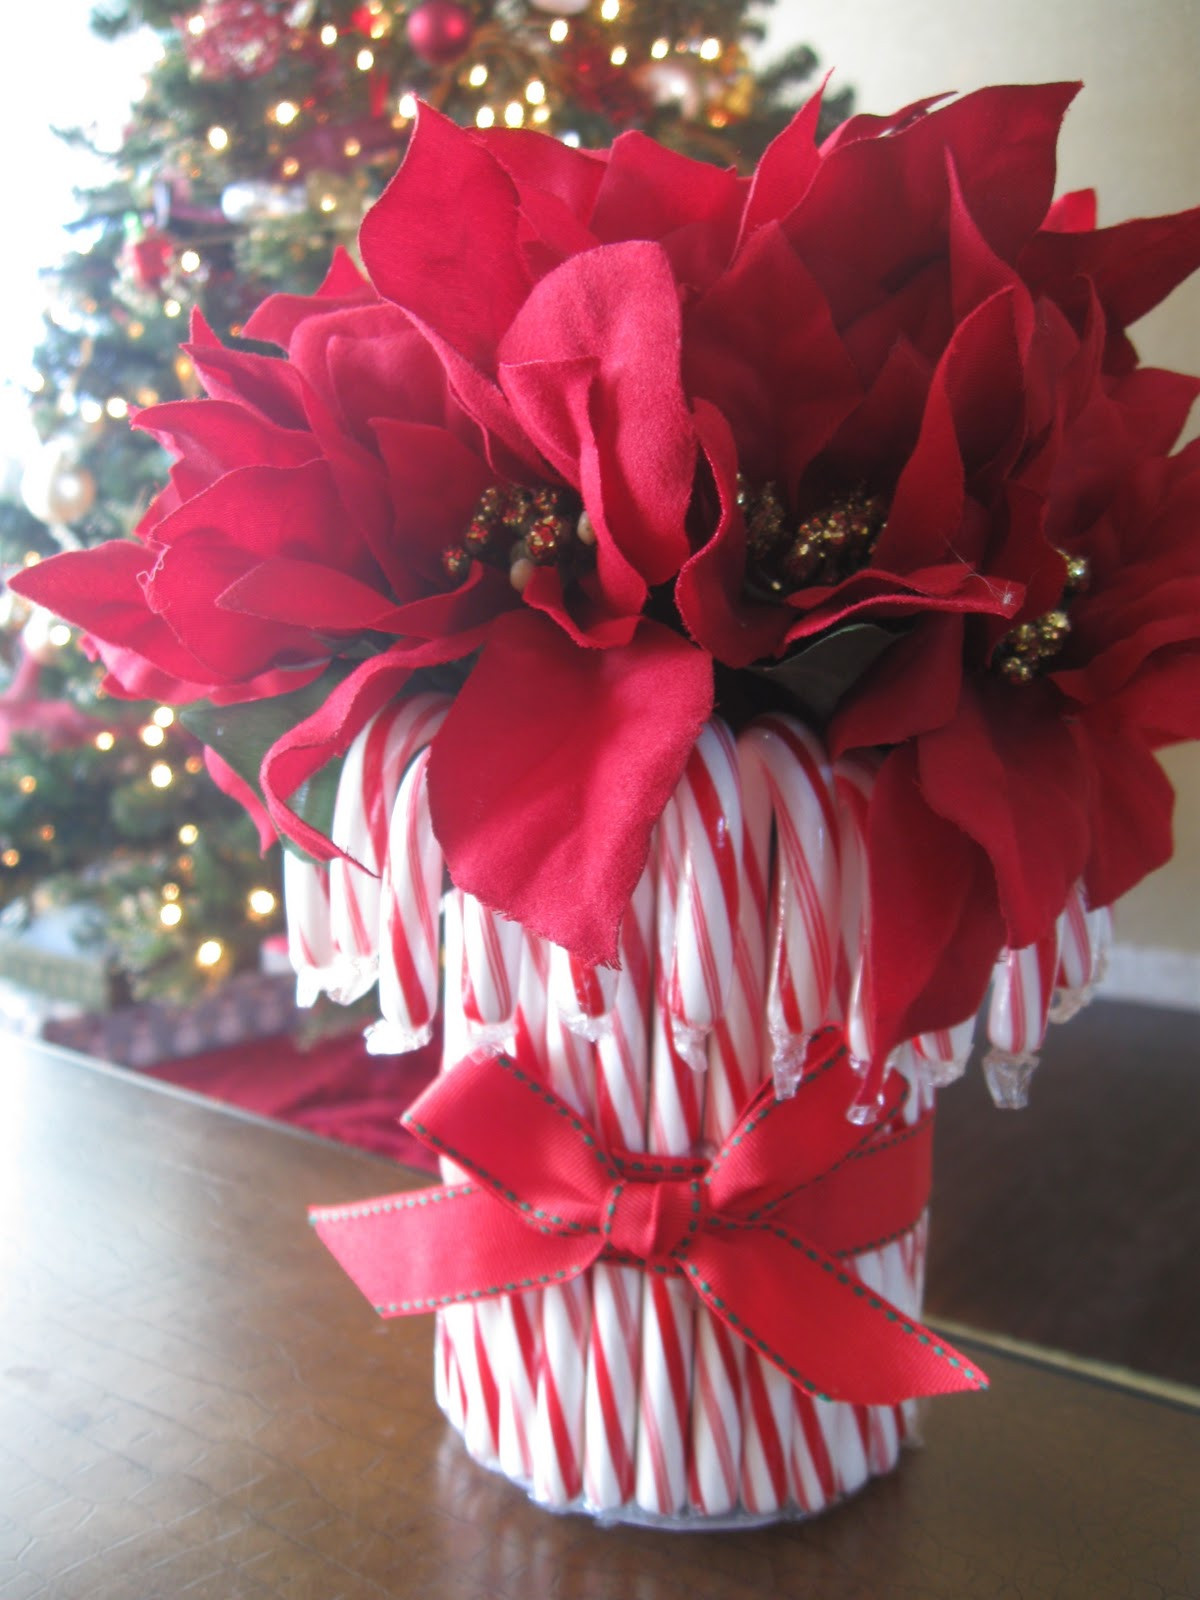 Candy Cane Centerpieces For Christmas
 DIY Candy Cane Vase